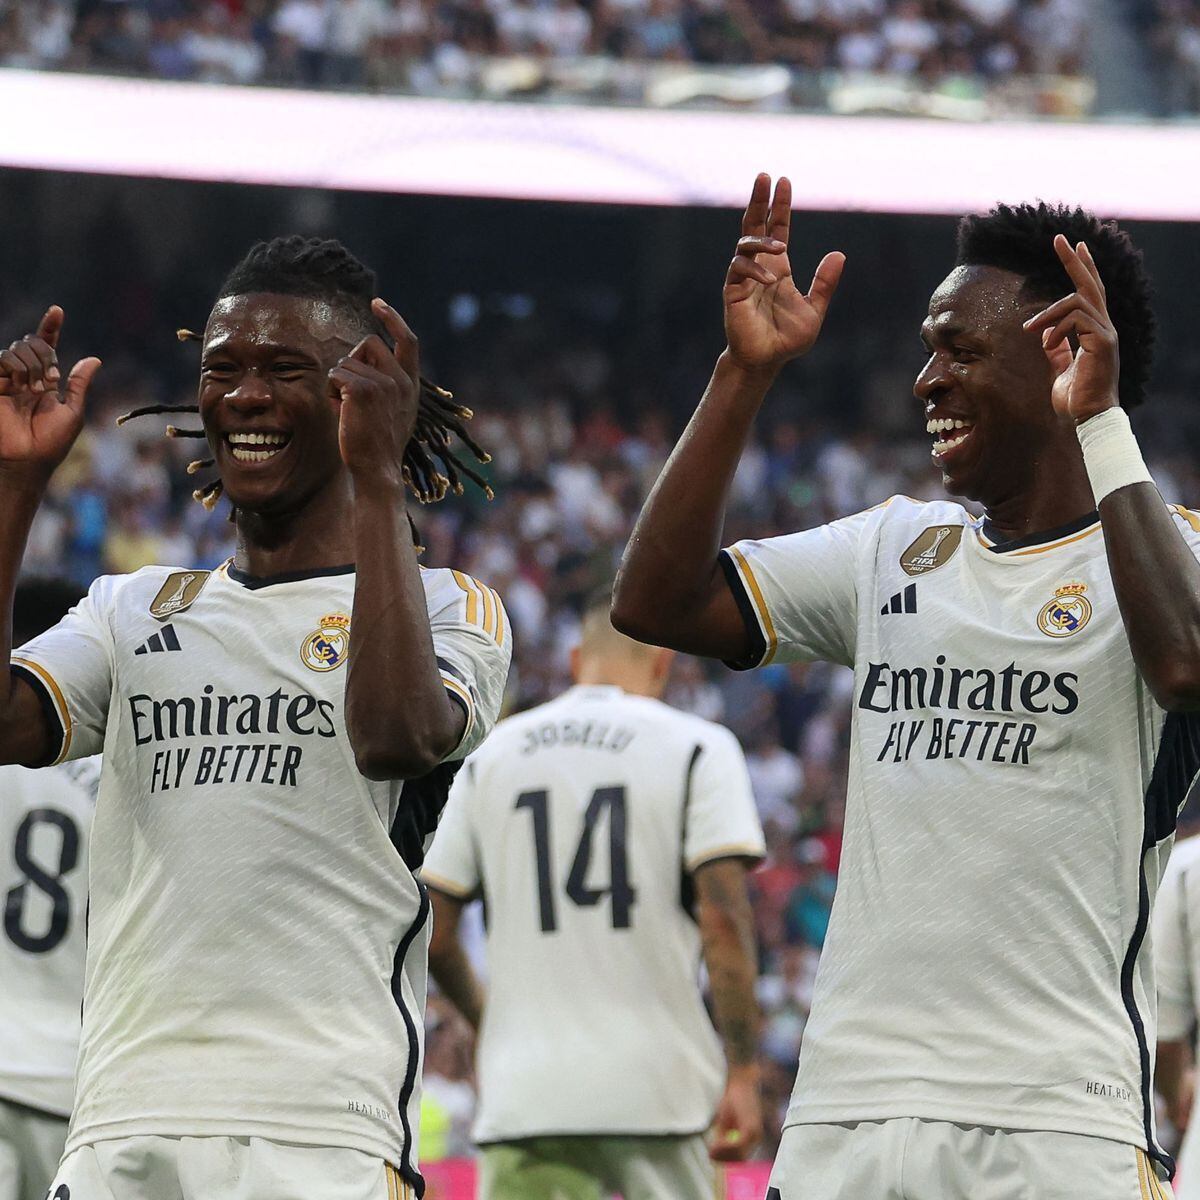 Has Camavinga been one of Real Madrid's best players? Is Vinicius